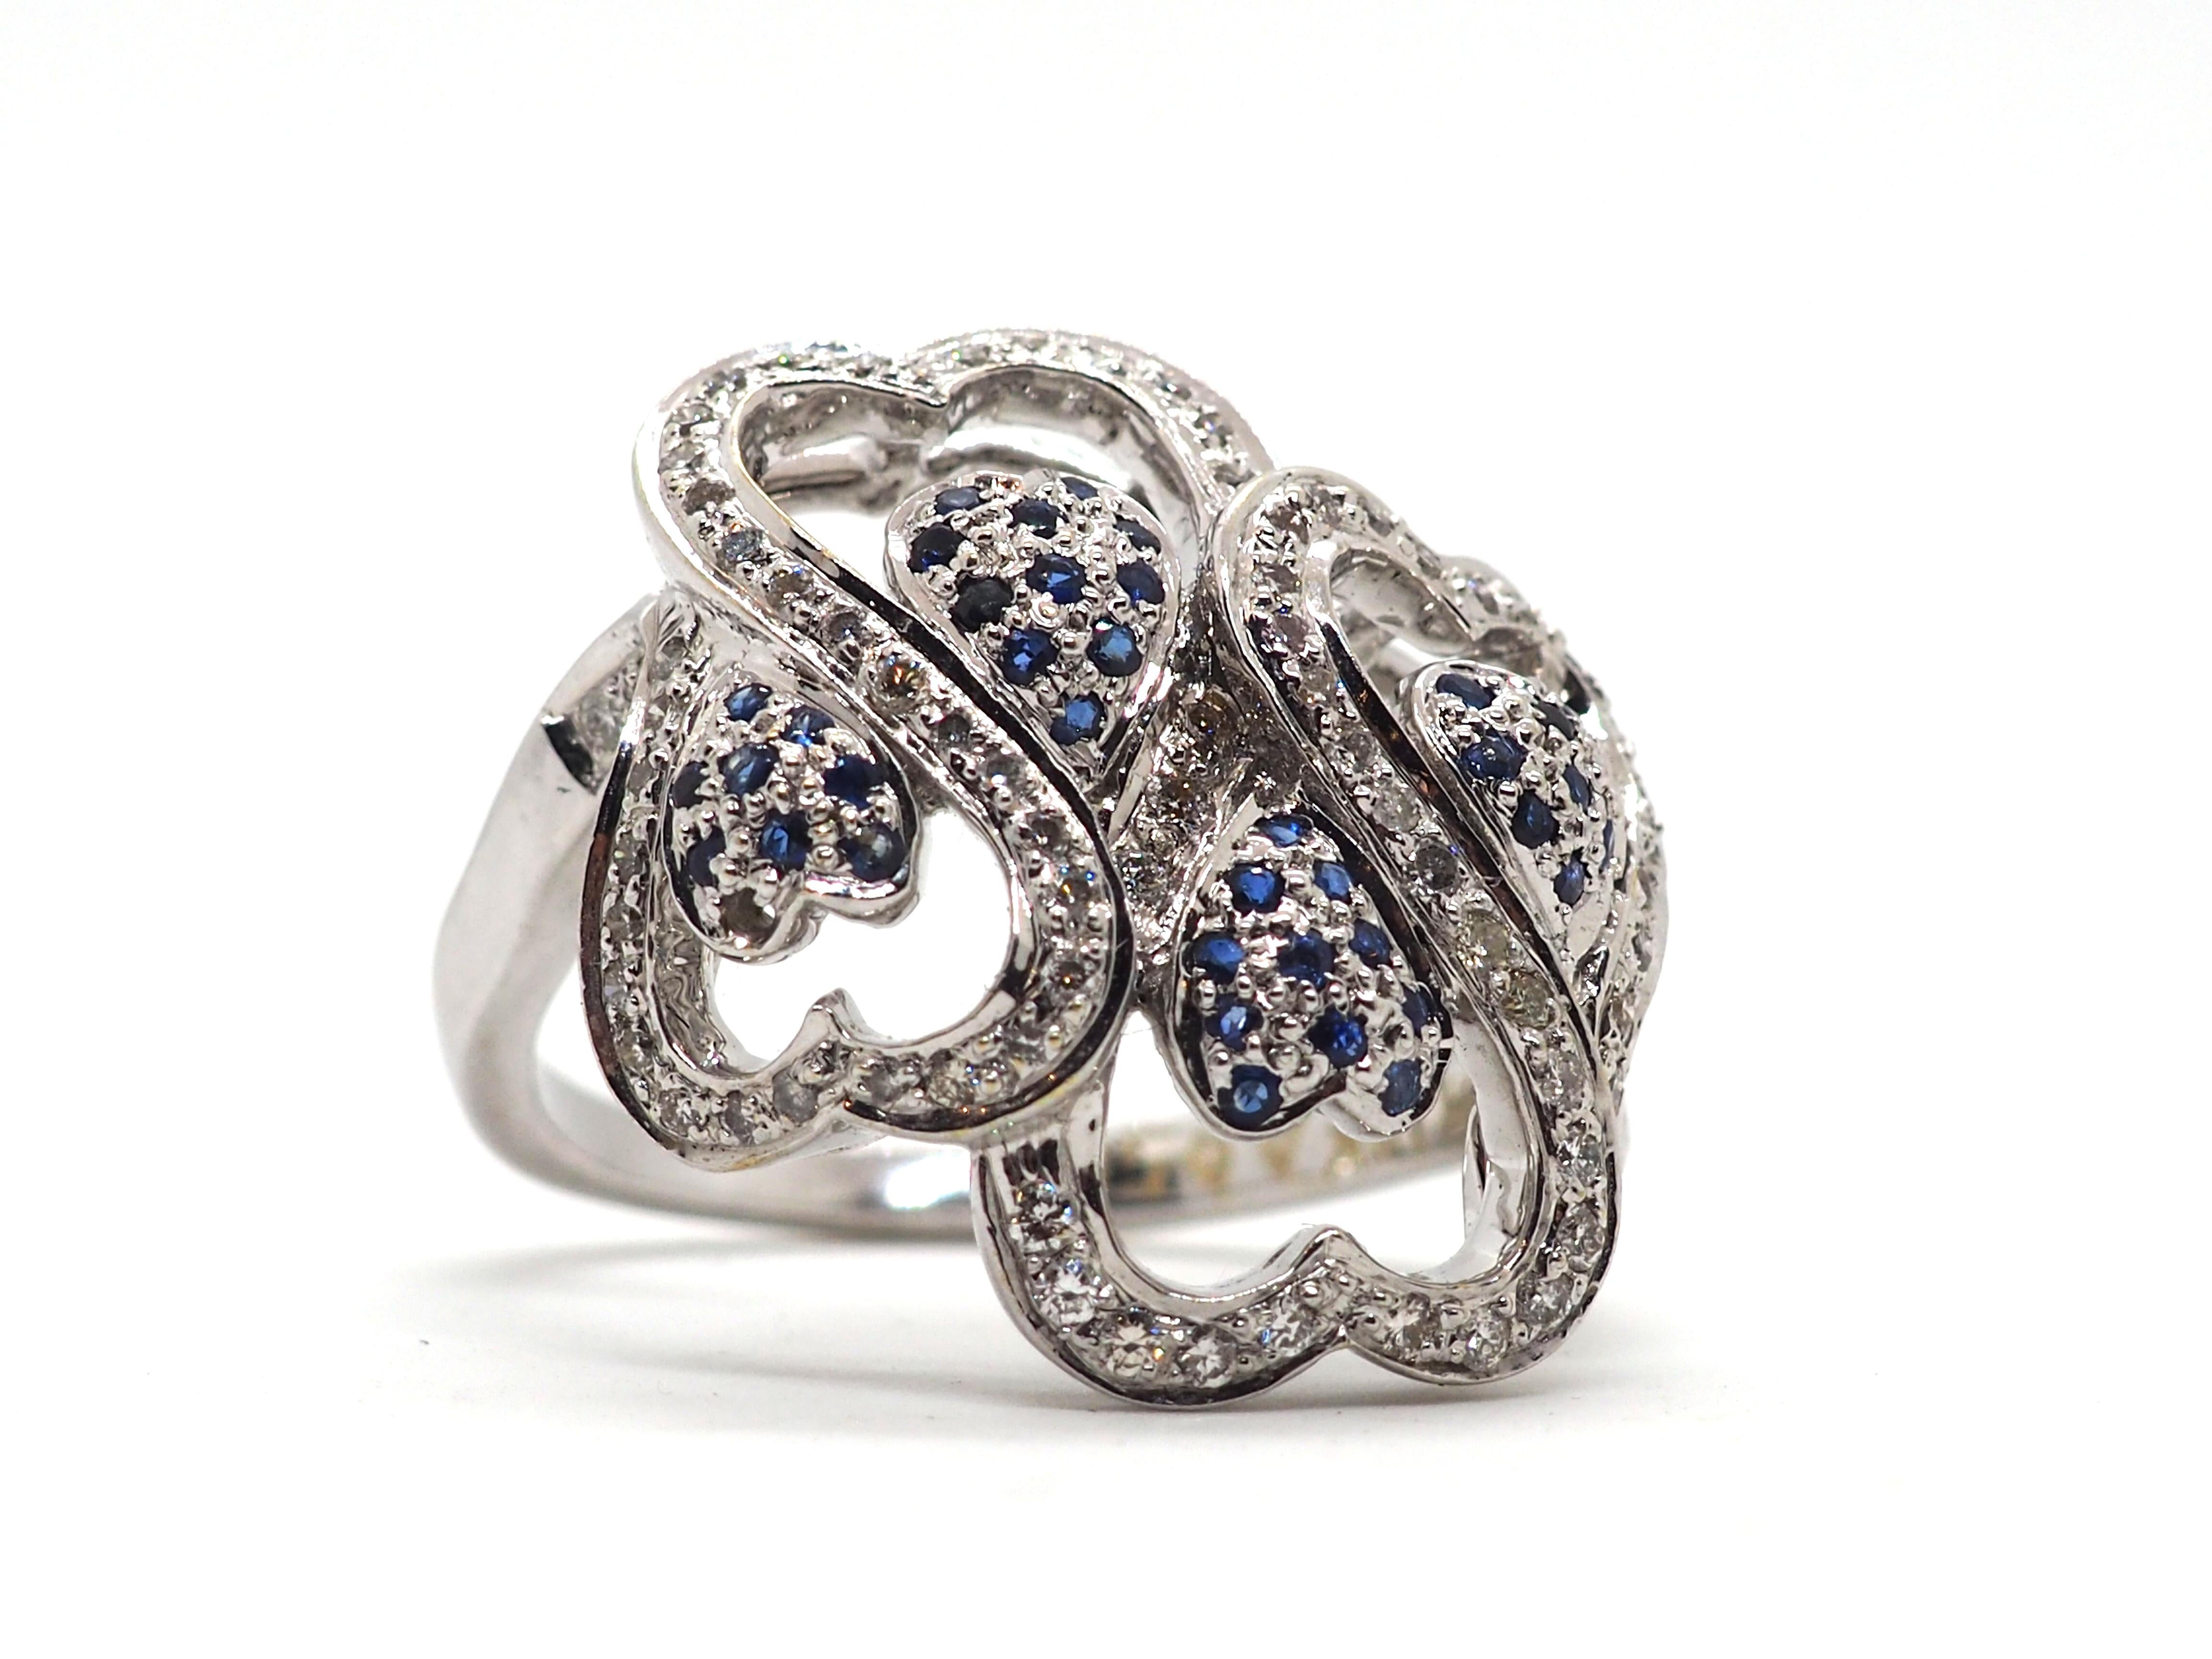 Beautiful fashion ring is crafted in a 18K white gold in a shape of the heart lines and paved with a diamonds about 0,5carat. Ring is also decorated with blue sapphires.

Eu size 59
Weight 11.5 g

The ring comes with our certificate and a